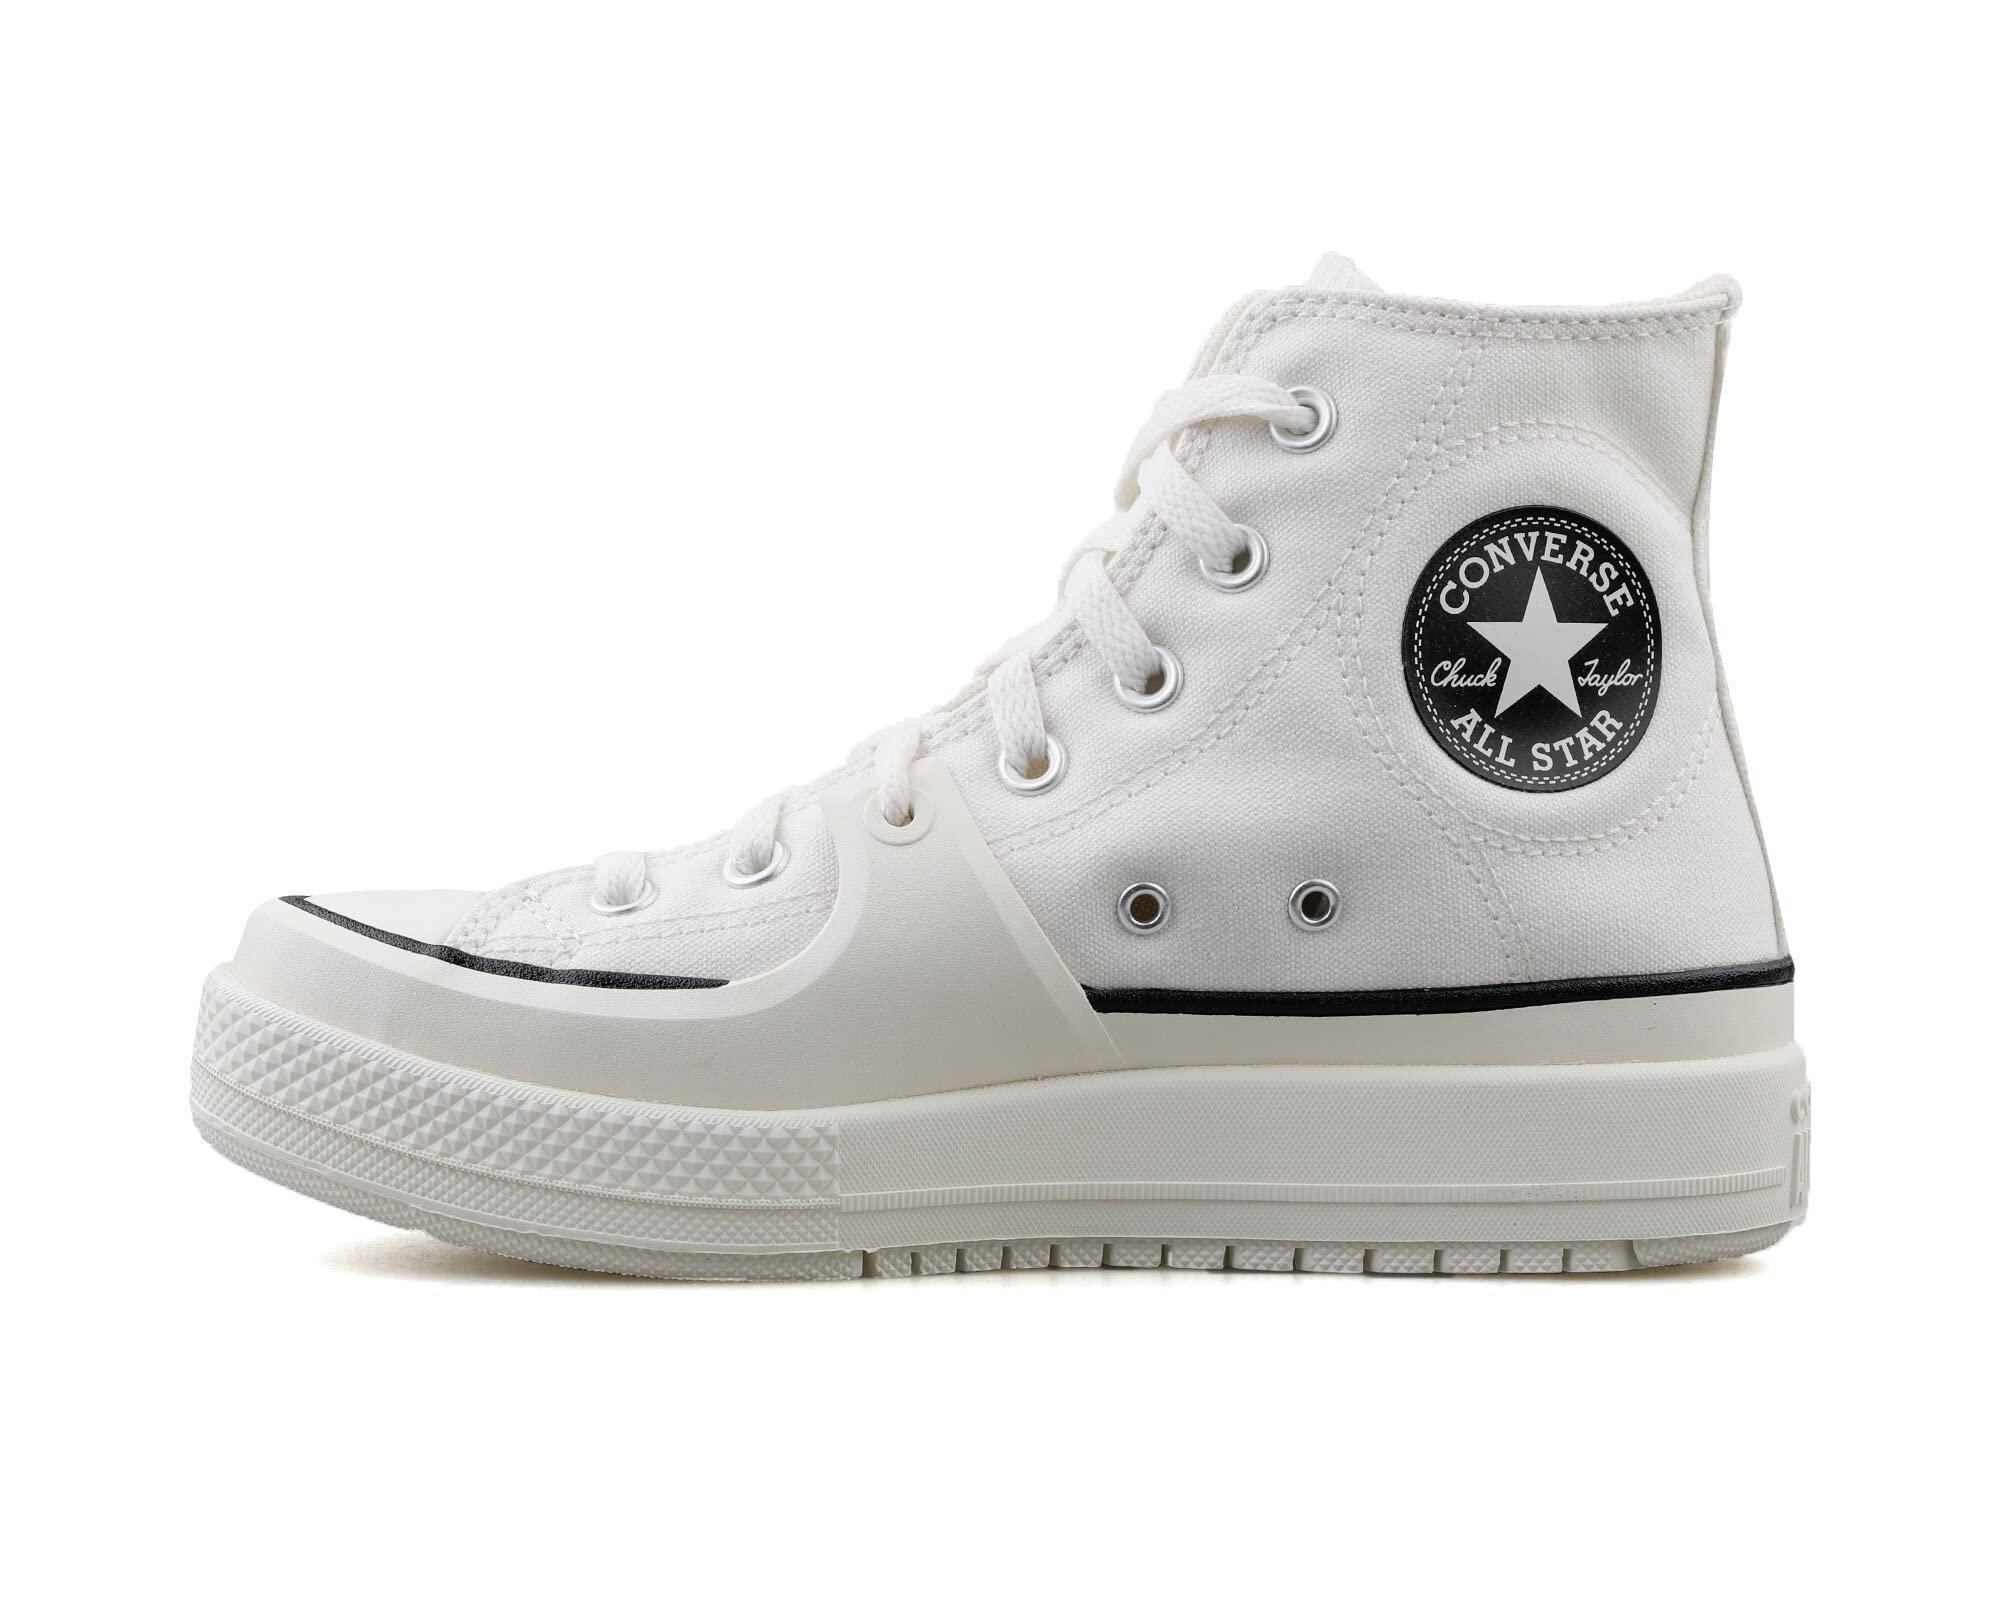 Converse Chuck Taylor All Star Construct Sneaker in White | Lyst UK